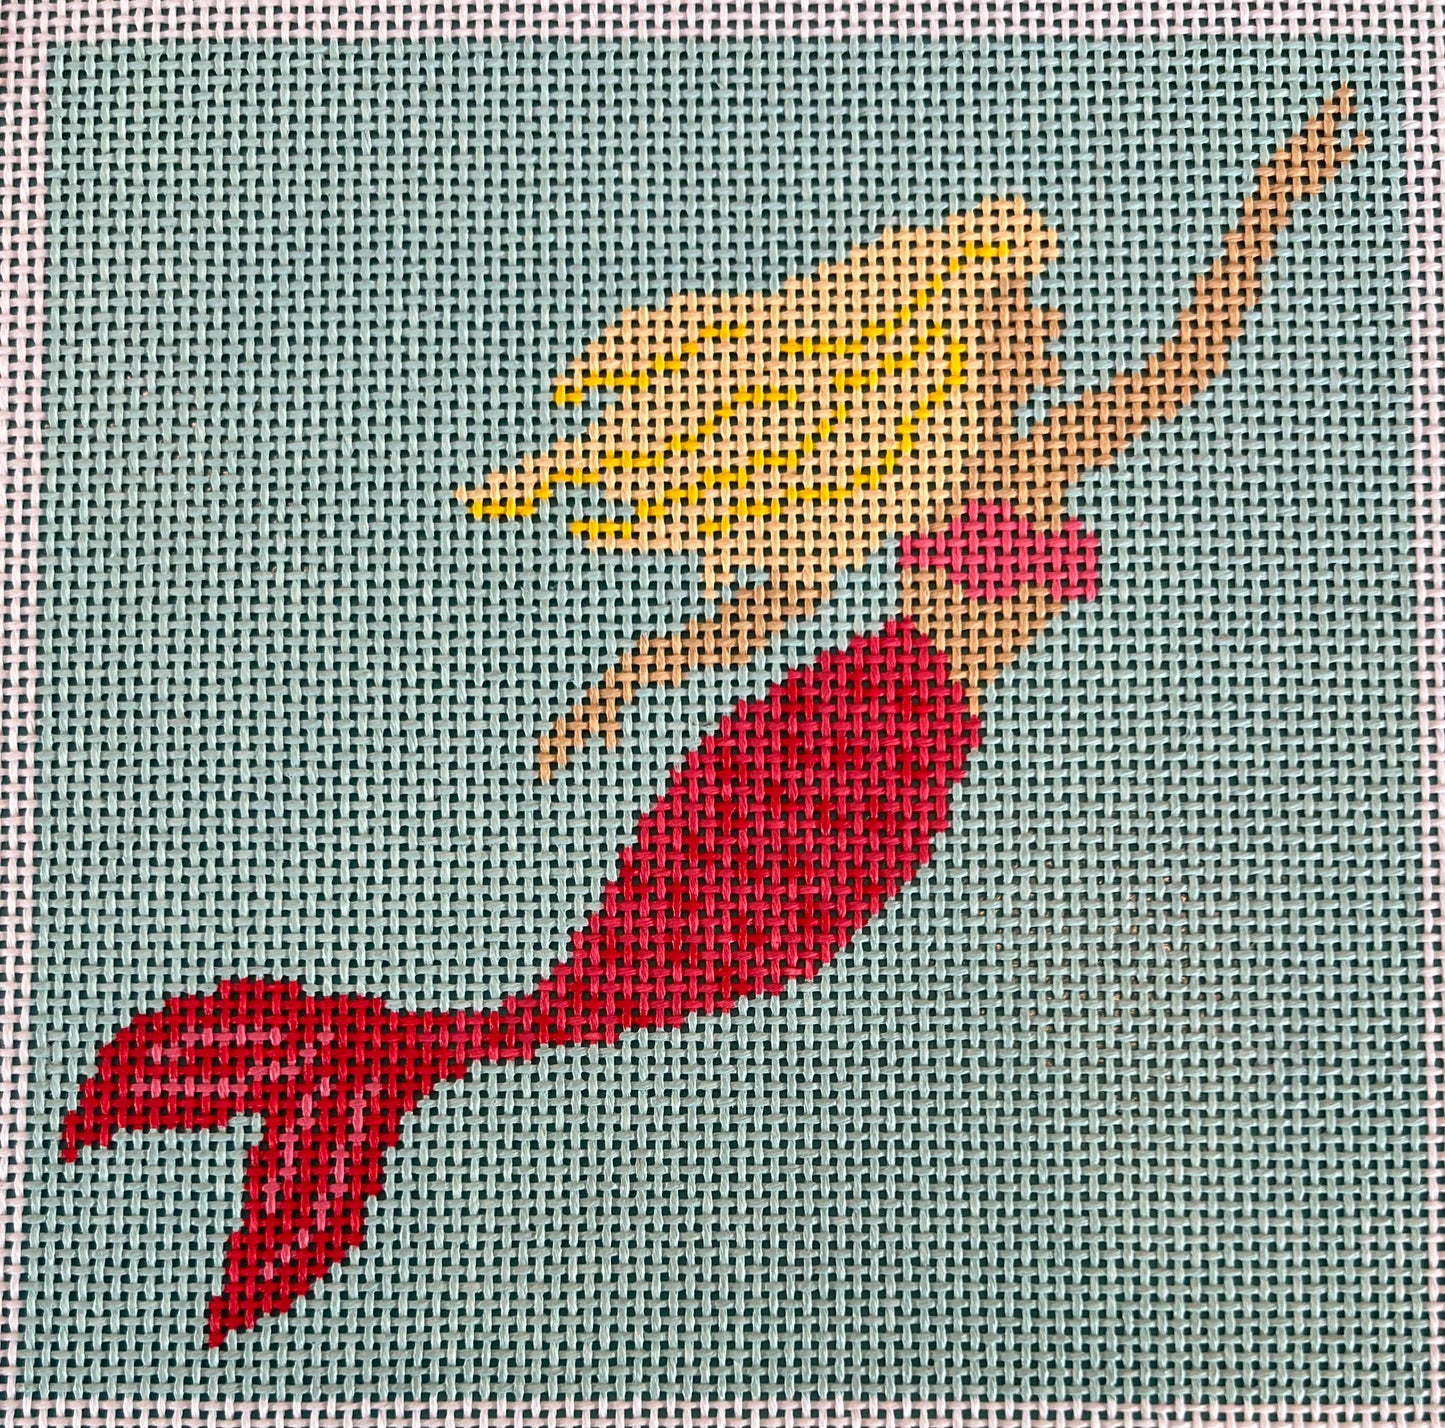 Mermaid with Pink Tail